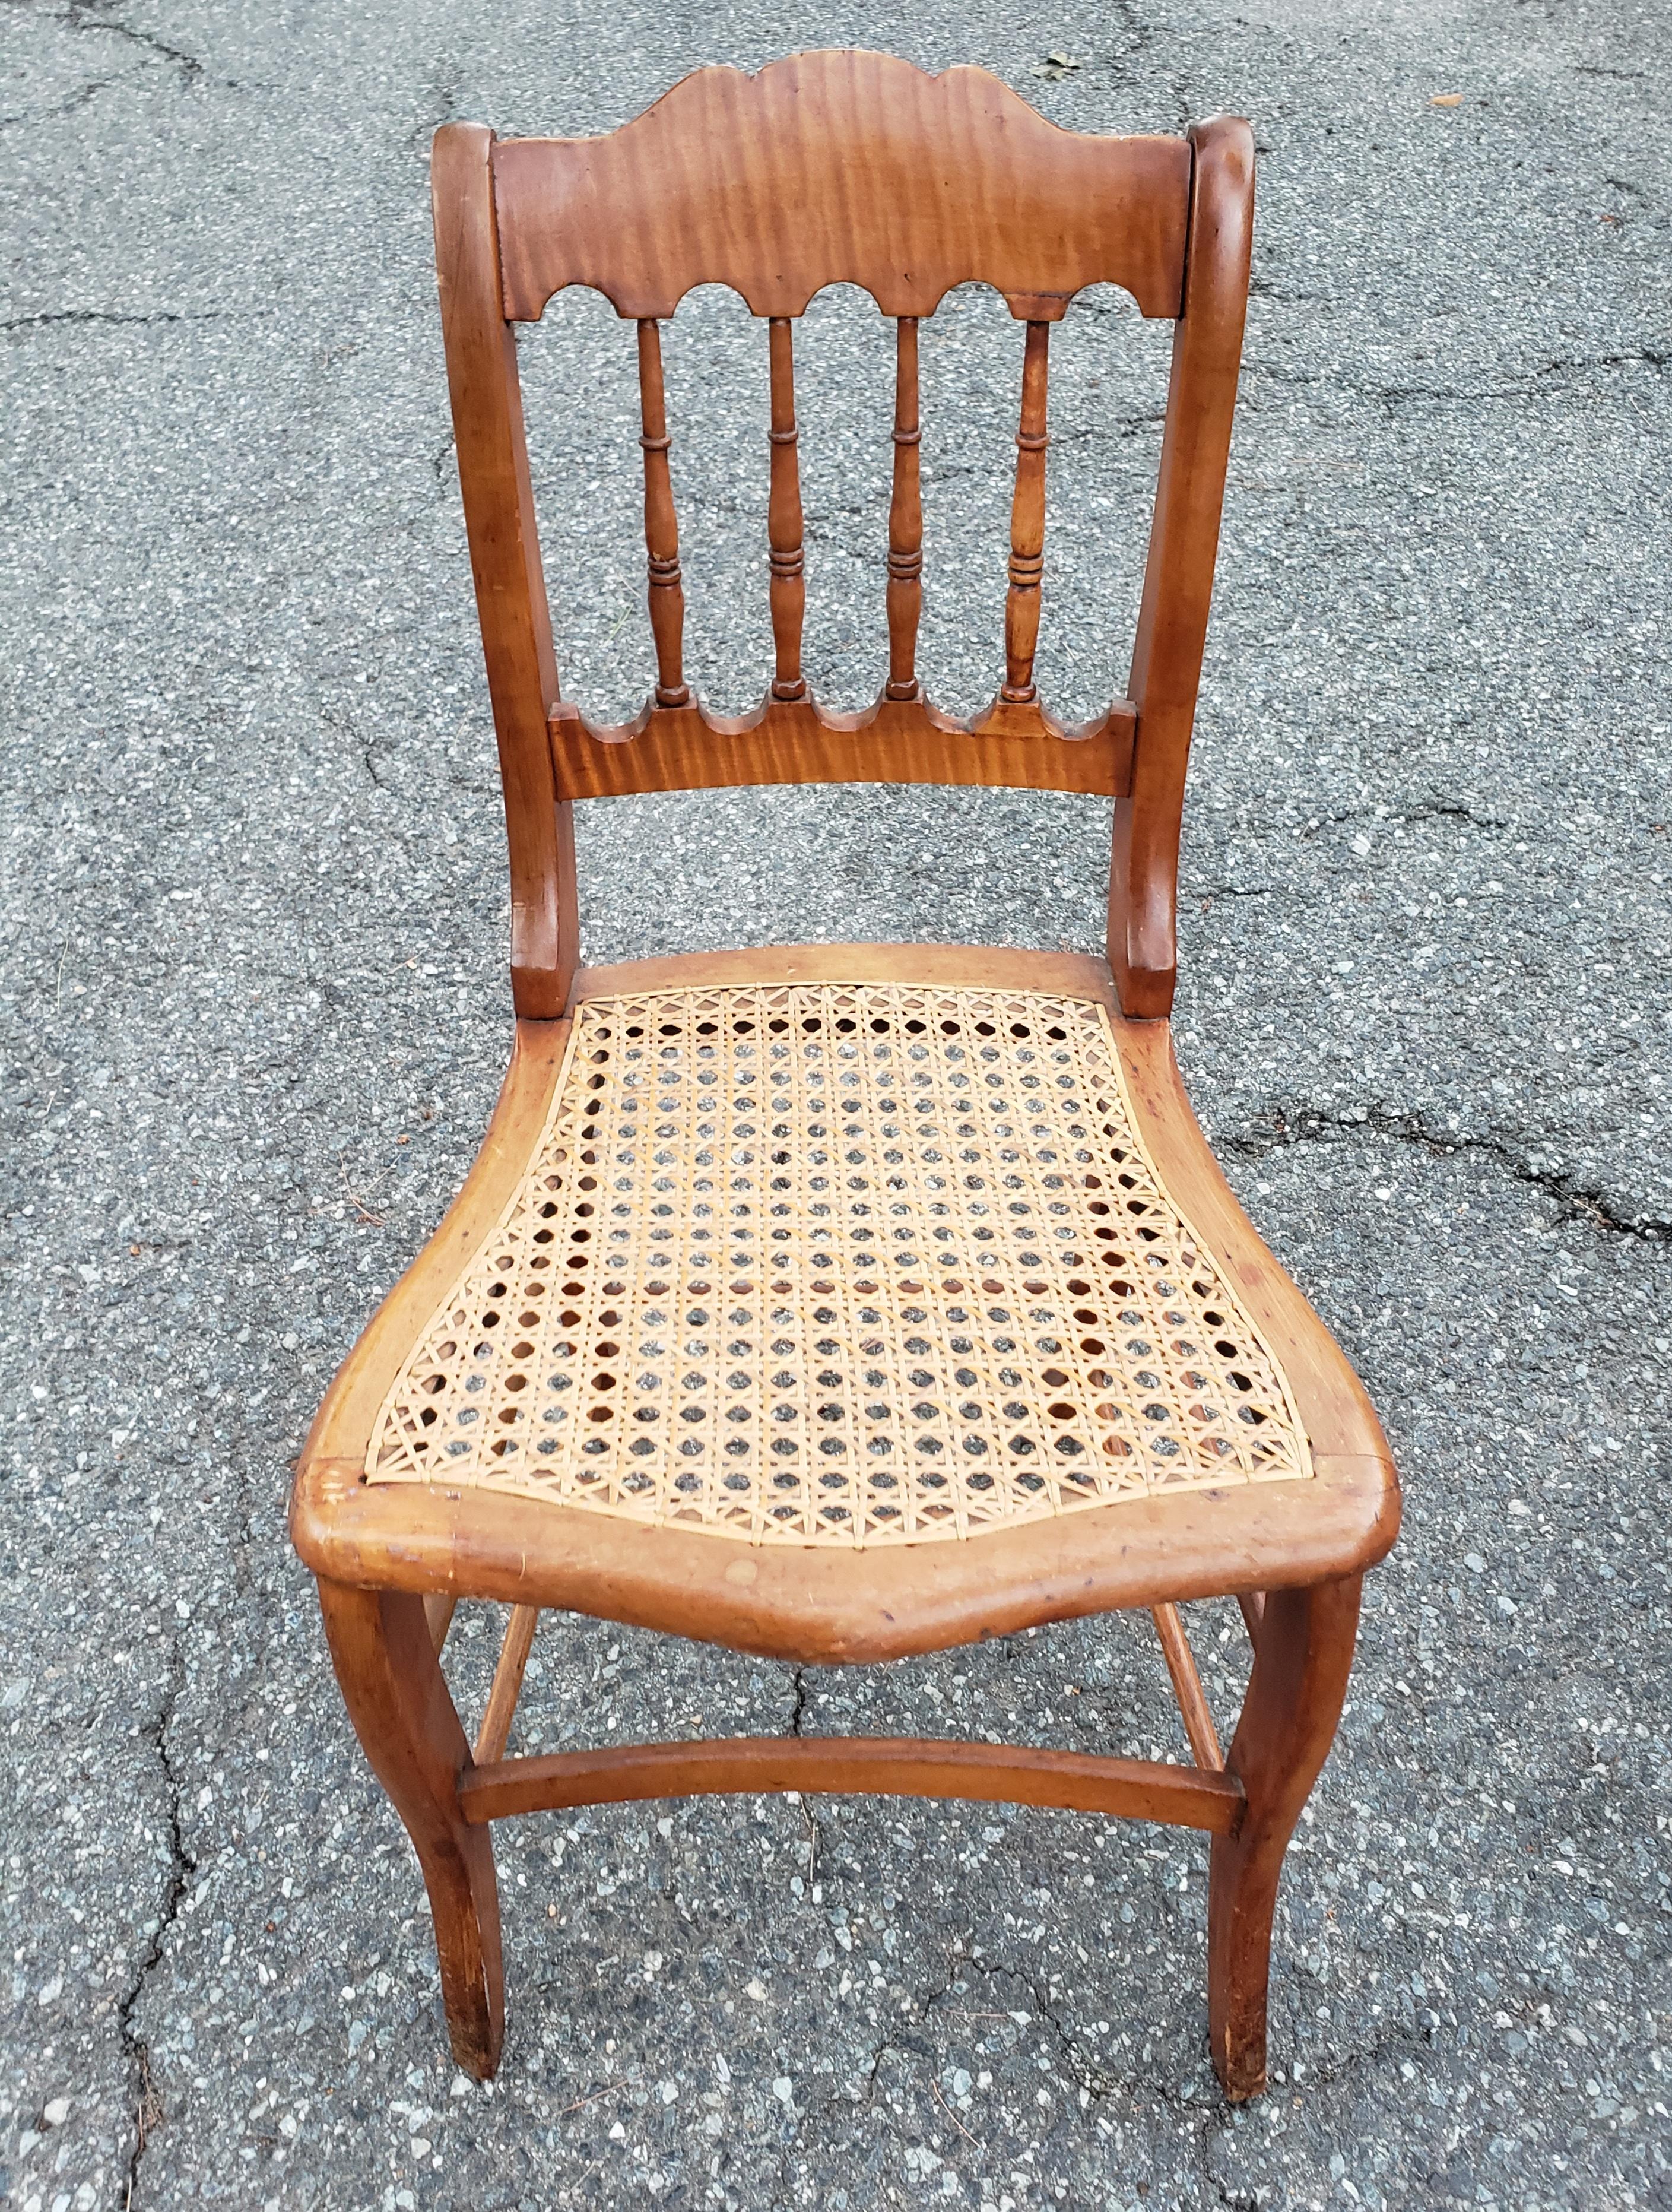 Pair of Early 20th Century Victorian Tiger Maple and Cane Seat Side Chair In Good Condition For Sale In Germantown, MD